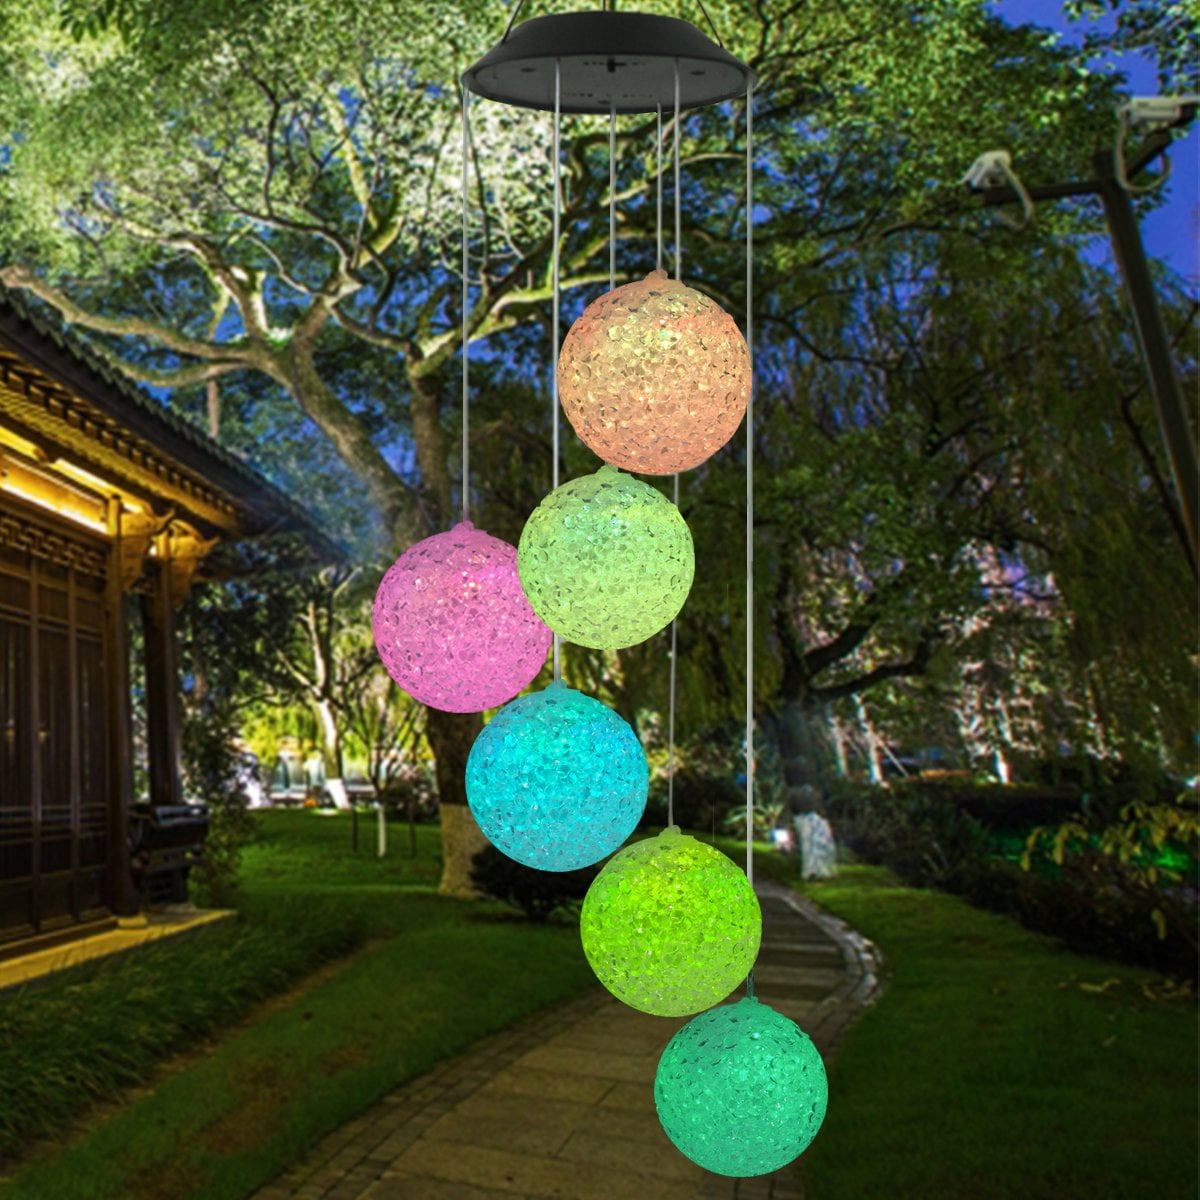 Details about   Wind Chime Solar Light LED Color Changing Garden Path Hanging Lamp Outdoor Decor 